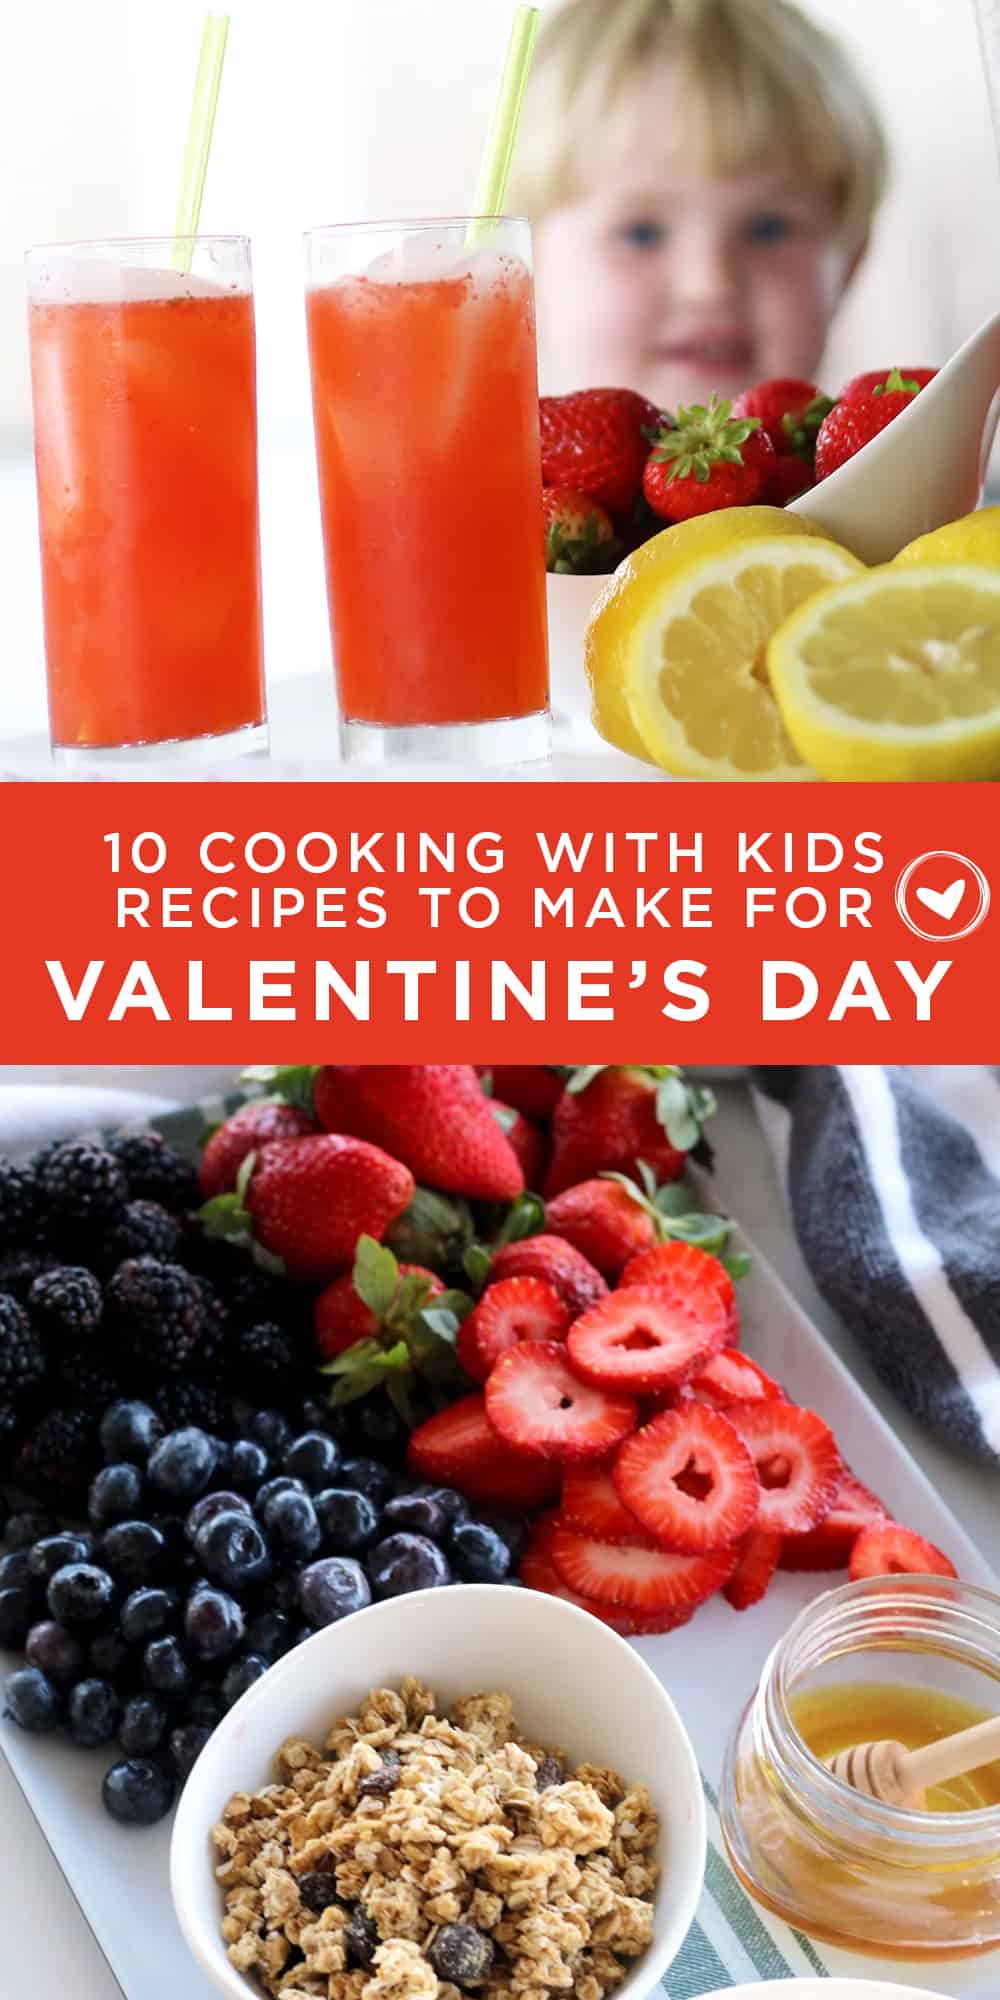 10 Cooking With Kids Recipes To Make For Valentine's Day